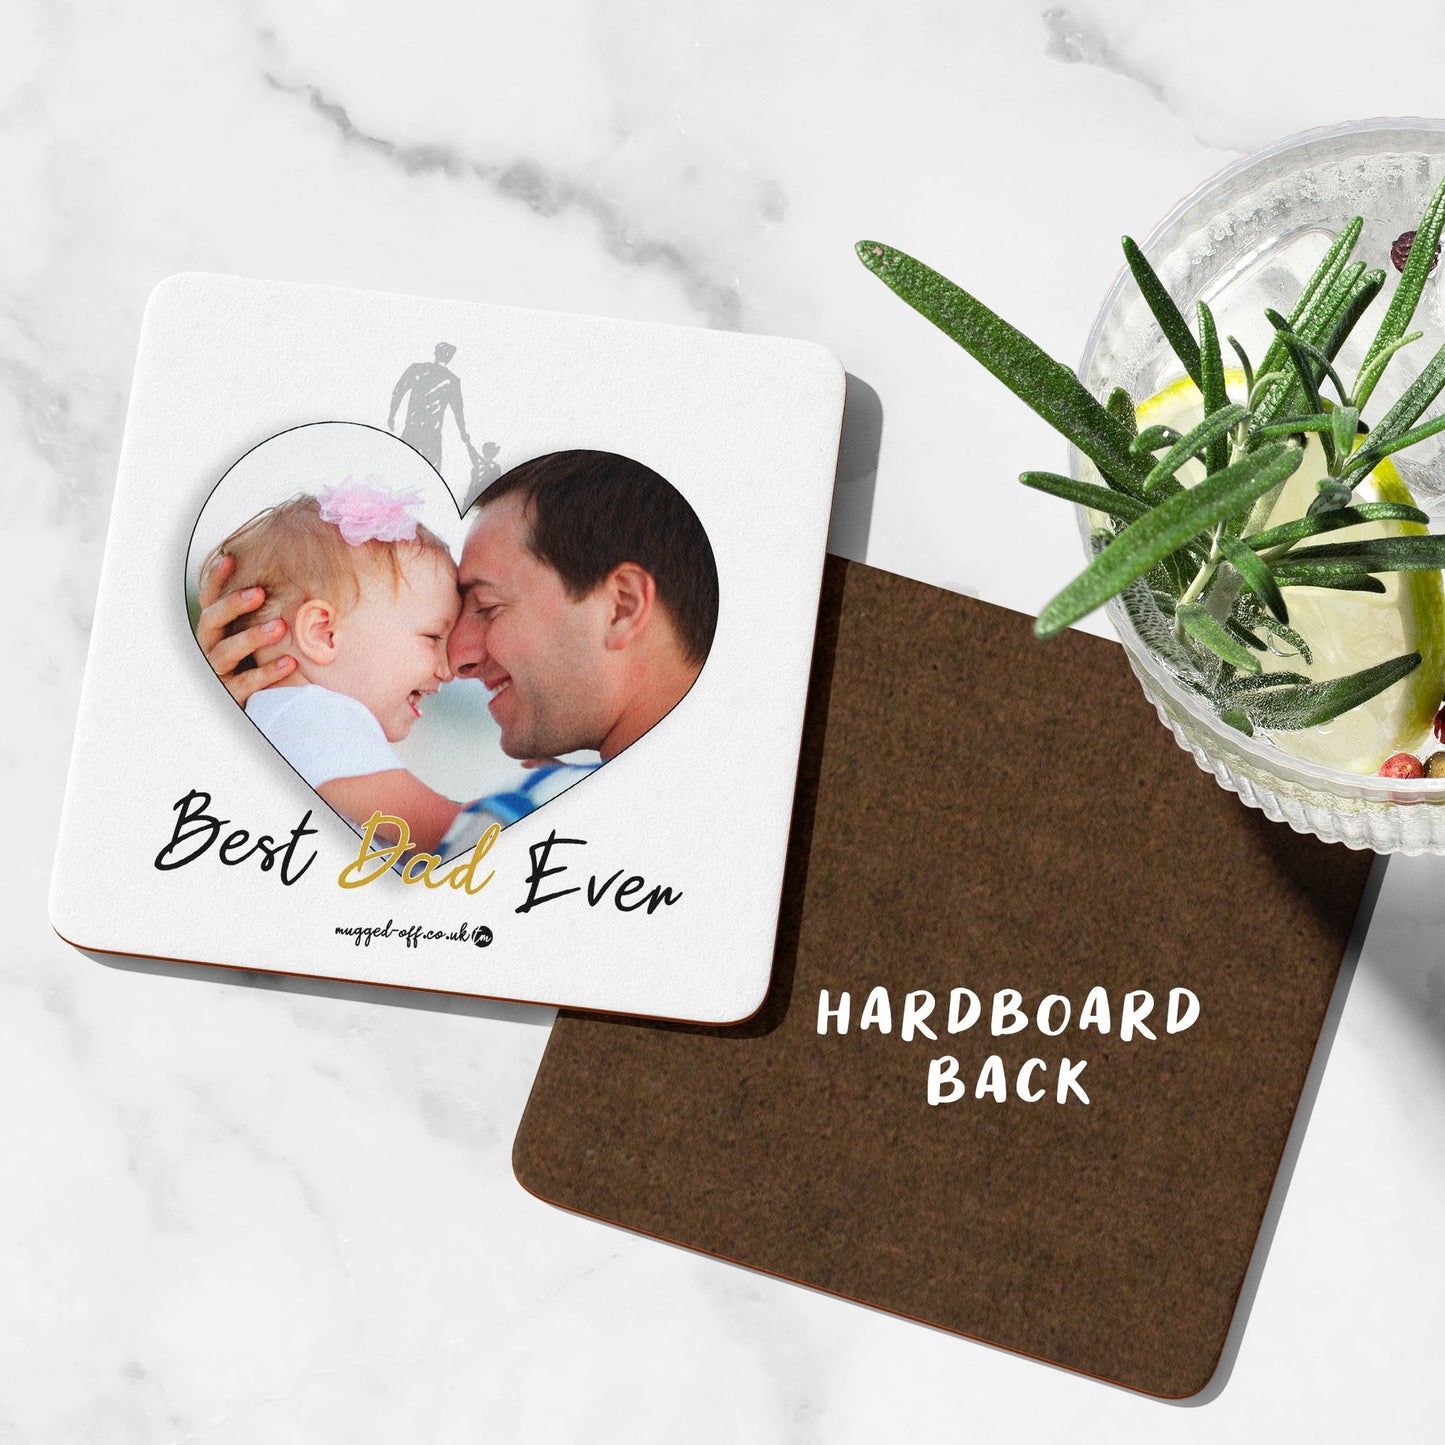 FREE DELIVERY - Best Dad Ever Gifts for him, Personalised Photo Mug - Gift for Fathers Day, Dad Birthday Lovely Present for Dad